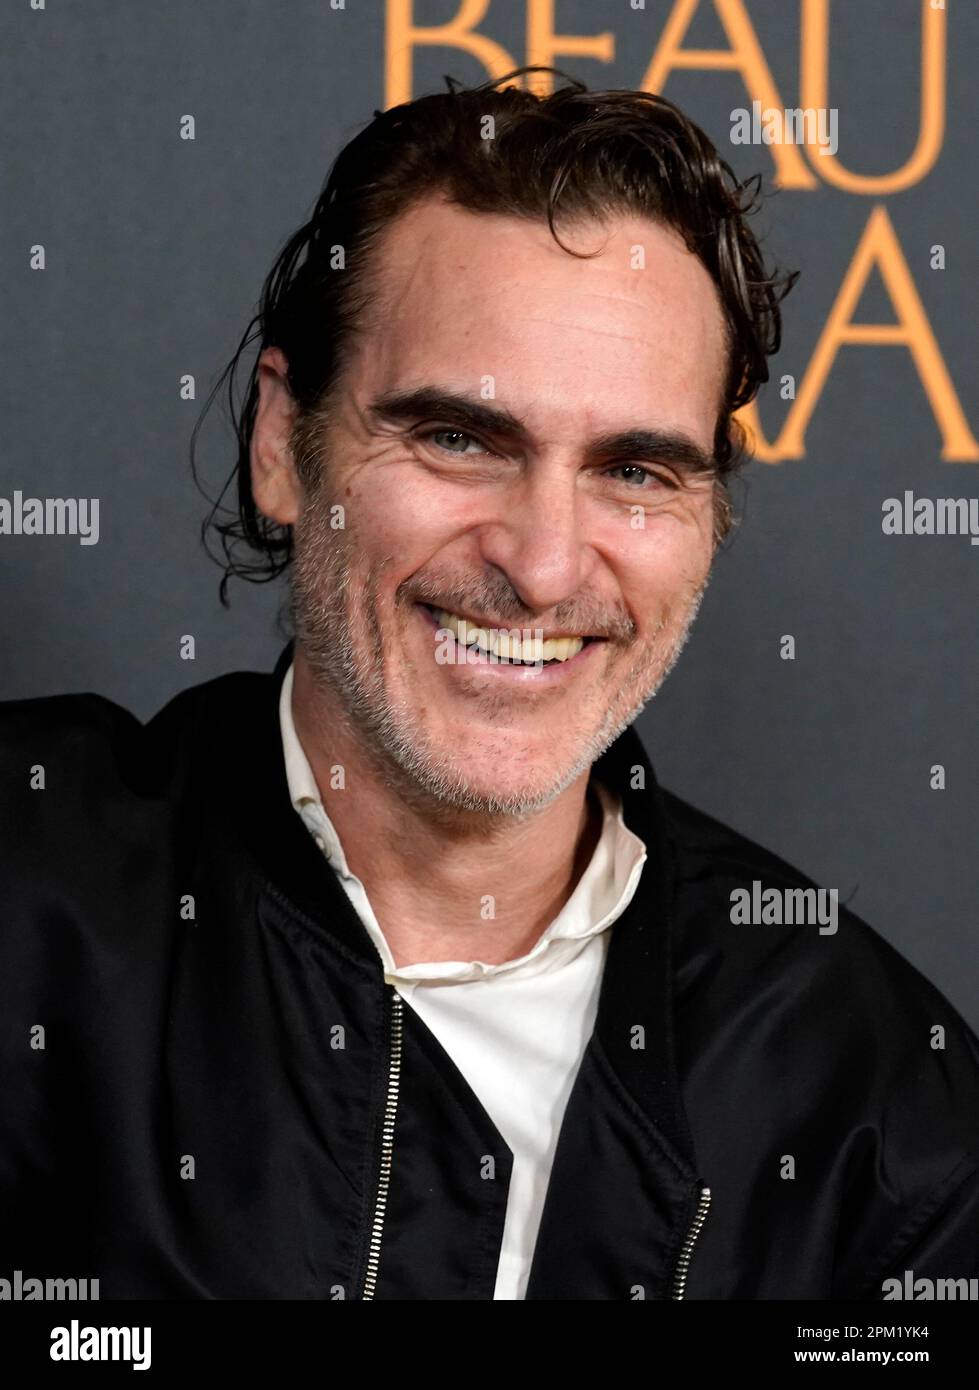 Joaquin Phoenix poses at the premiere of the film "Beau Is Afraid," Monday, April 10, 2023, at the Directors Guild of America in Los Angeles. (AP Photo/Chris Pizzello) Stock Photo